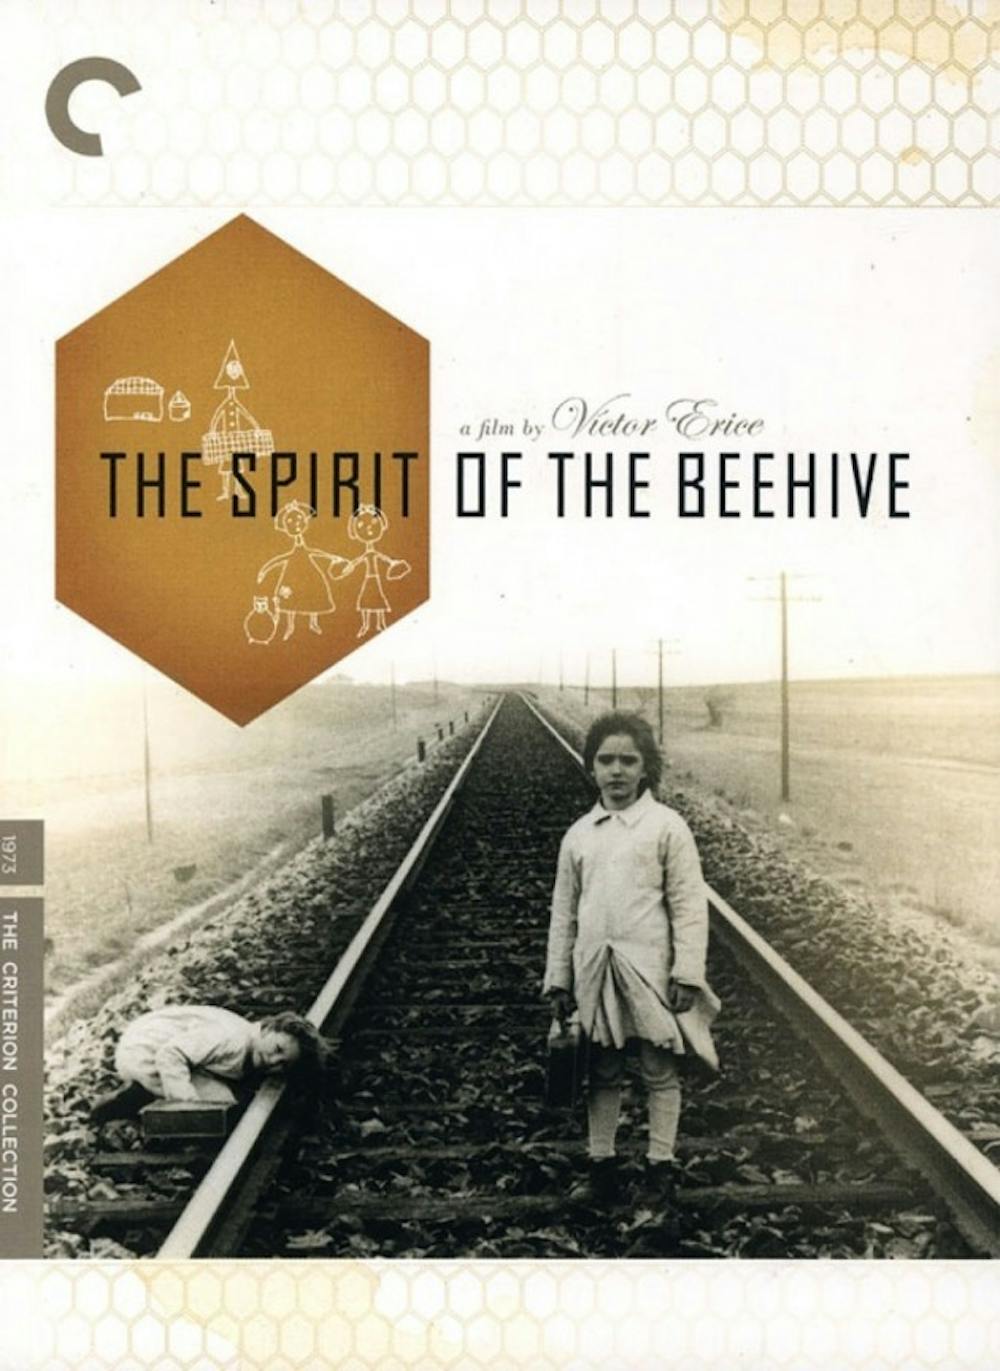 The Buffalo Film Seminars&rsquo; screening of The Spirit of the Beehive
filled the audience&nbsp;with child-like bewilderment and curiosity.
The film follows Ana, a&nbsp;7-year-old girl in a post-Civil War Spain,
who becomes fascinated with Frankenstein&nbsp;after the film
is shown in her town.&nbsp;
Courtesy of Bocaccio Distribuci&oacute;n